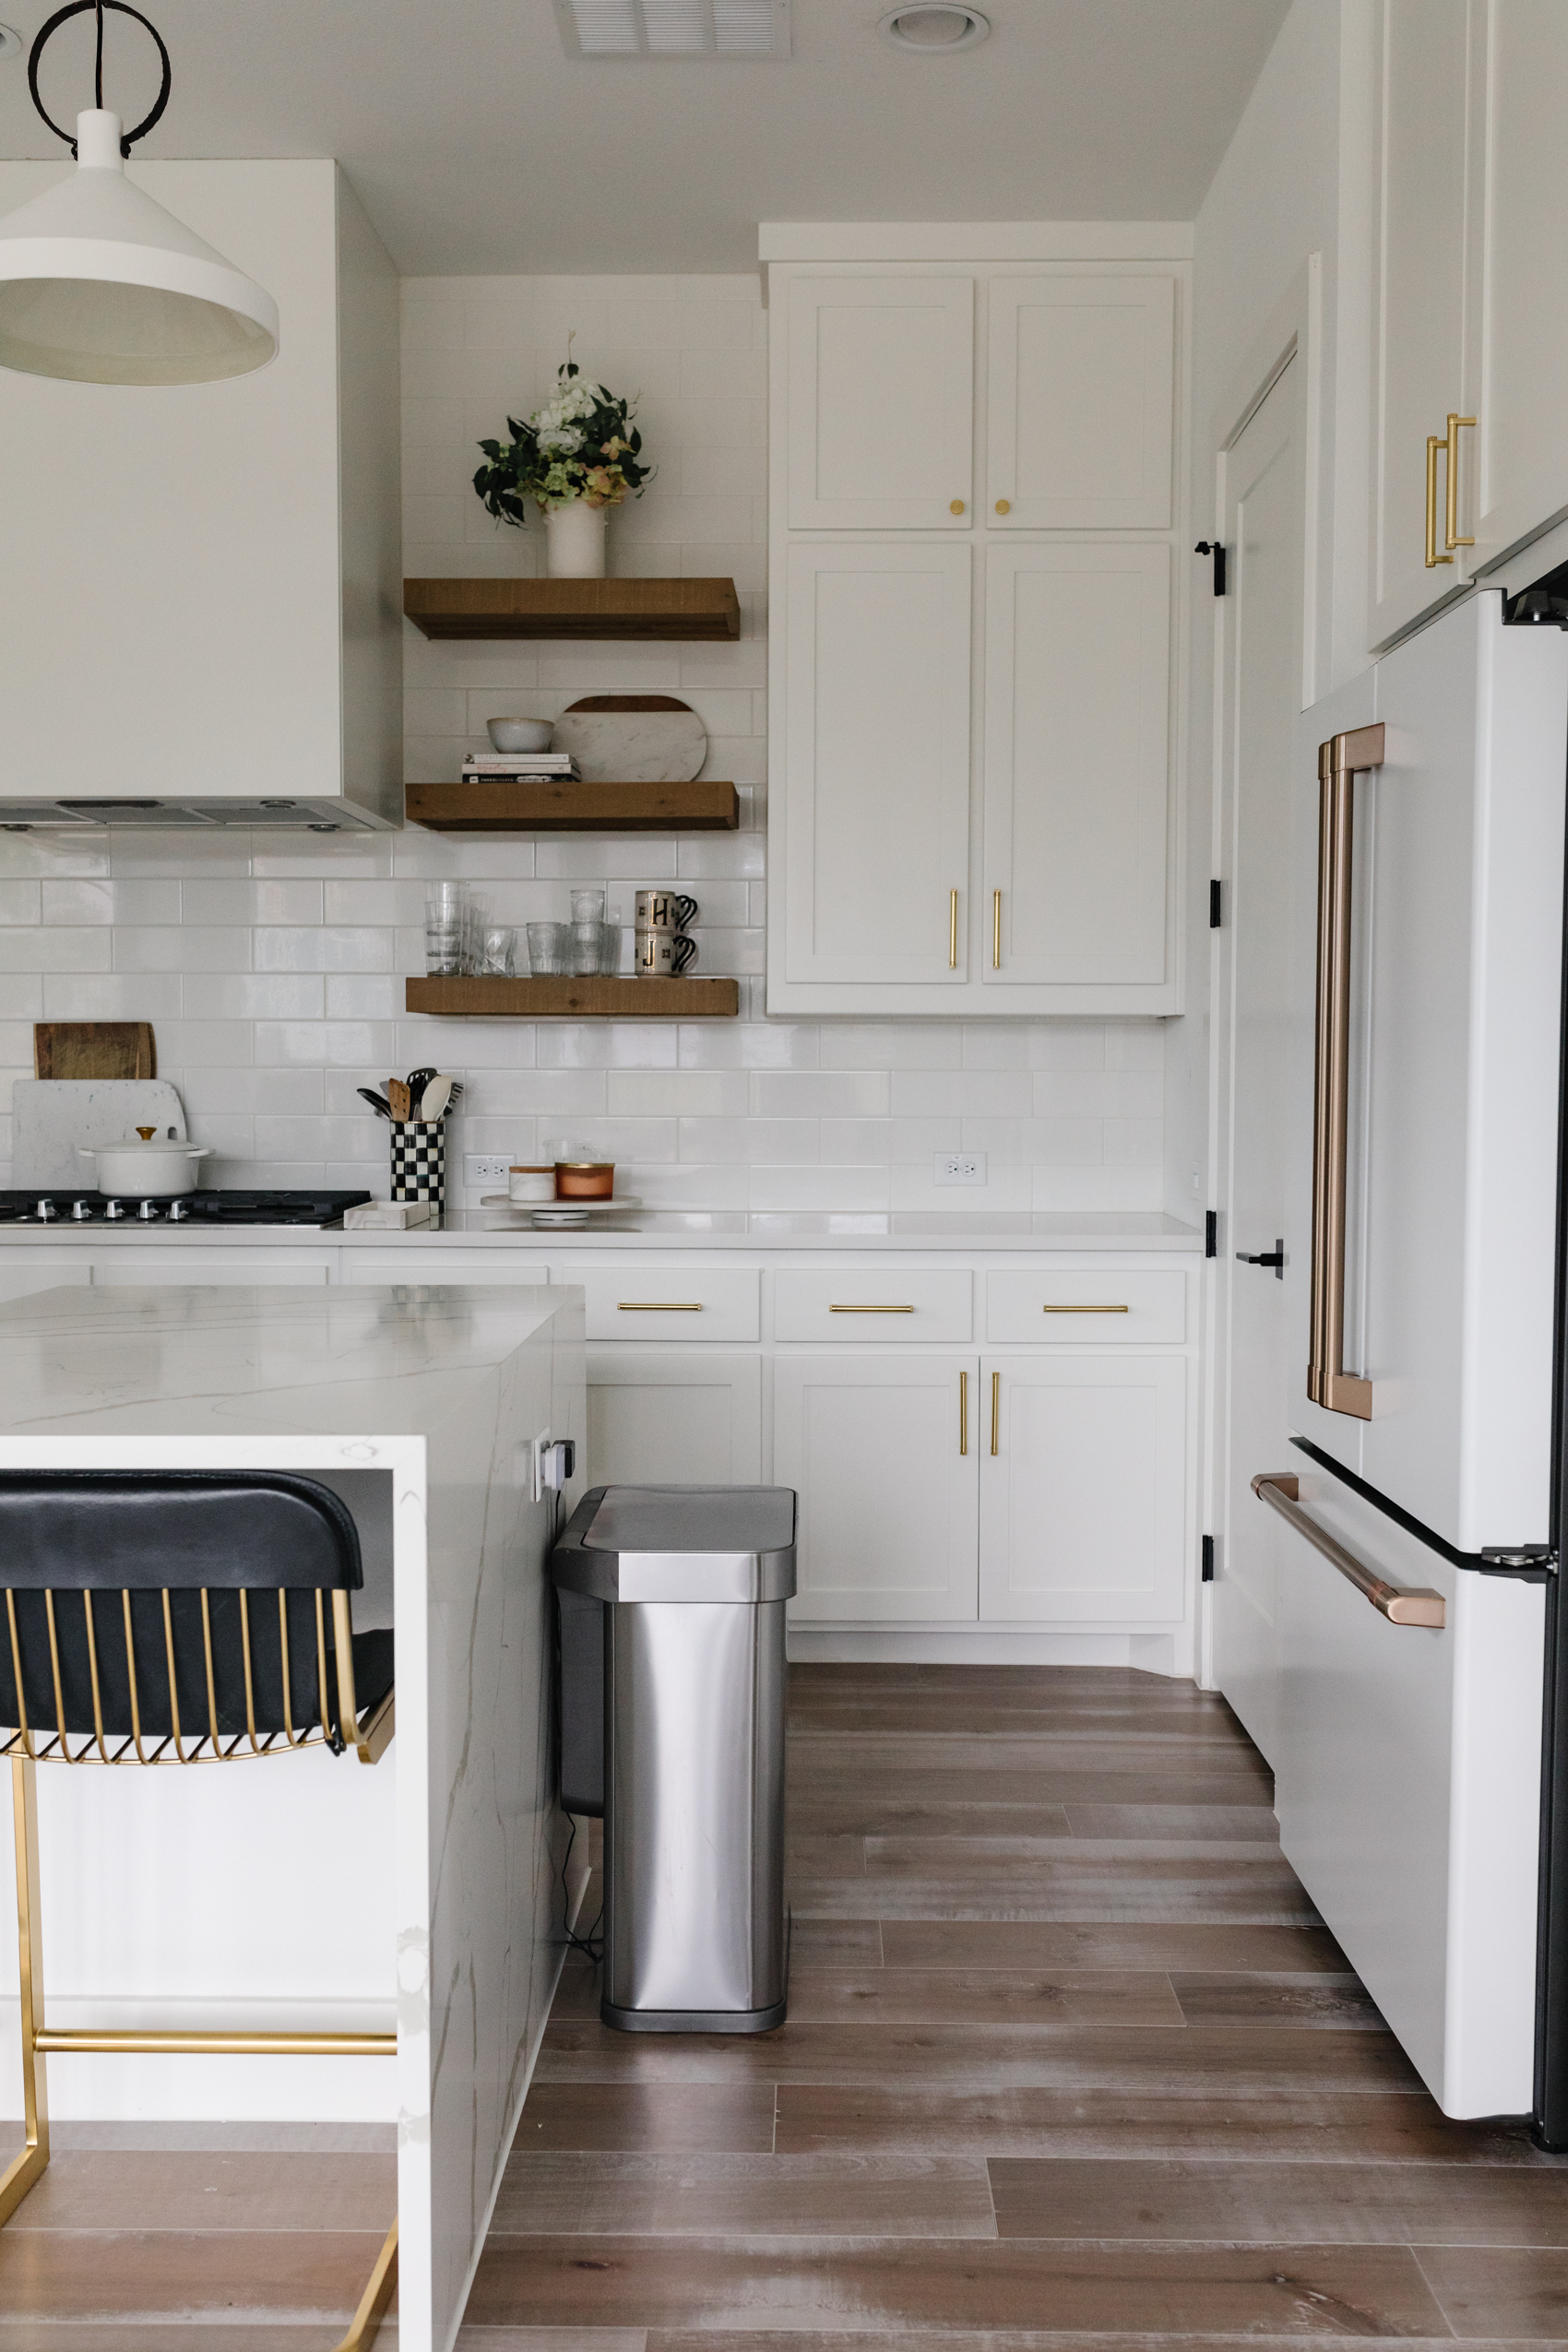 Transitional kitchen with brass Brizo faucet, McGee & Co Pendant lights, CB2 Barstools, Cafe Appliances Refrigerator, Rejuvenation West Slope hardware, MacKenzie-Childs utensil holder kettle and more